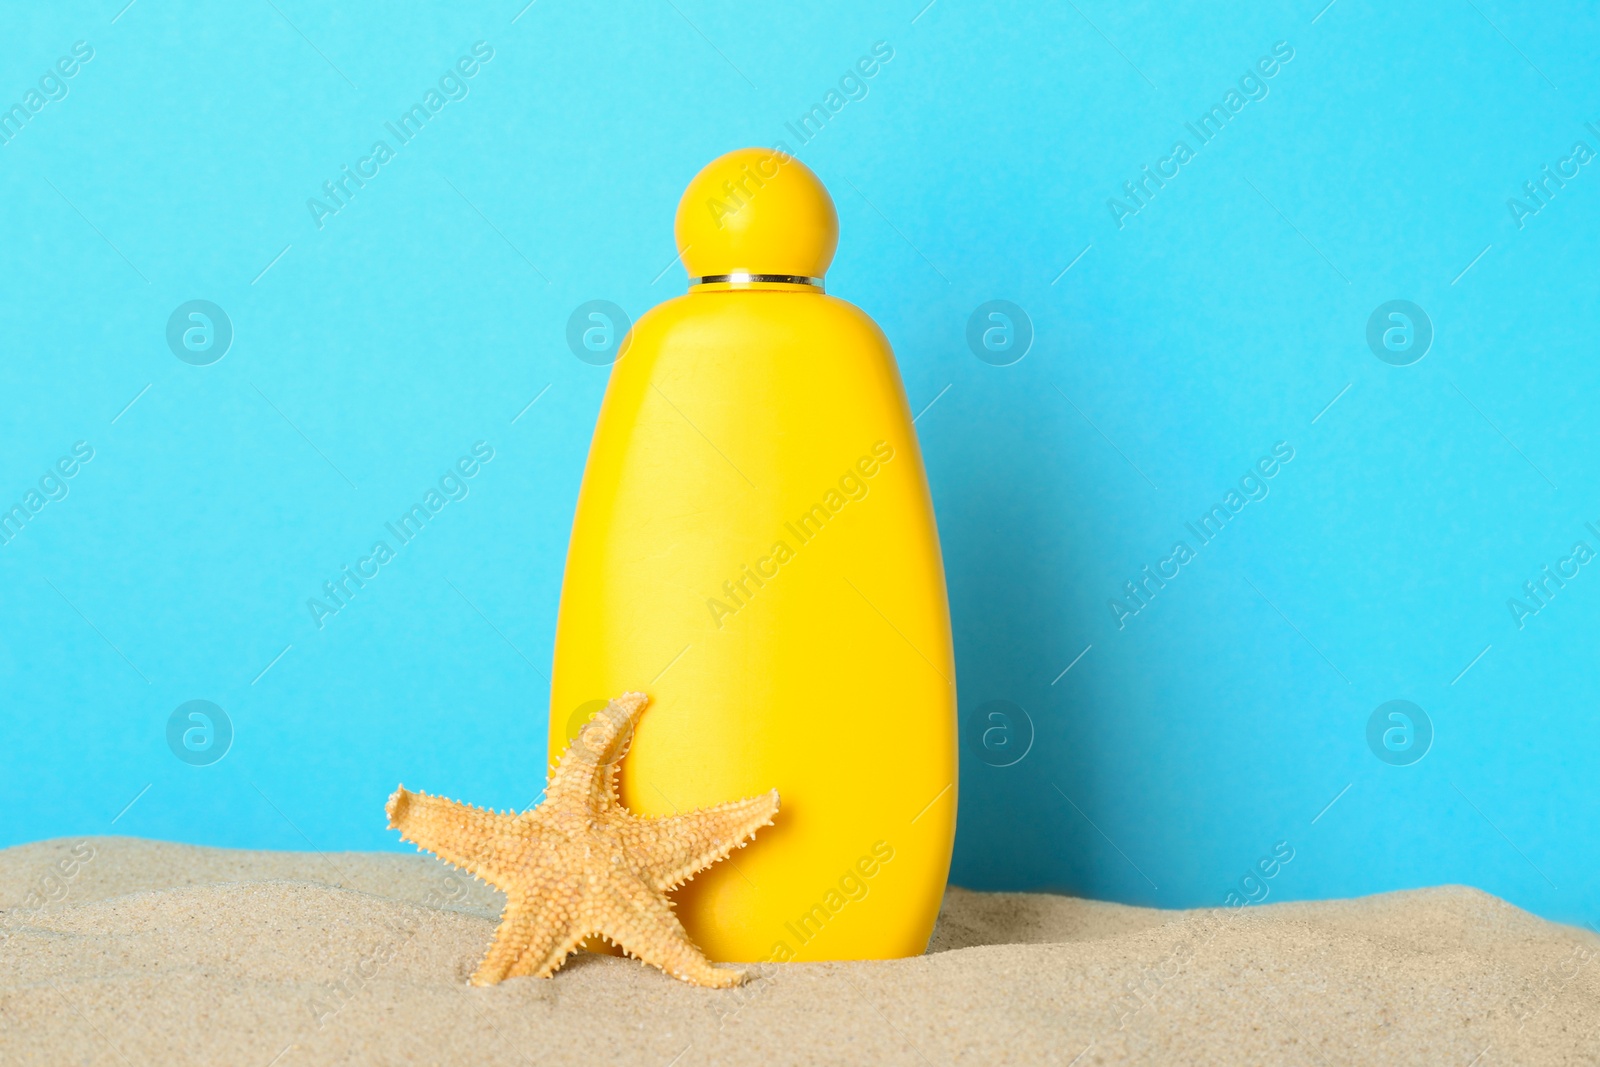 Photo of Suntan product and starfish on sand against light blue background